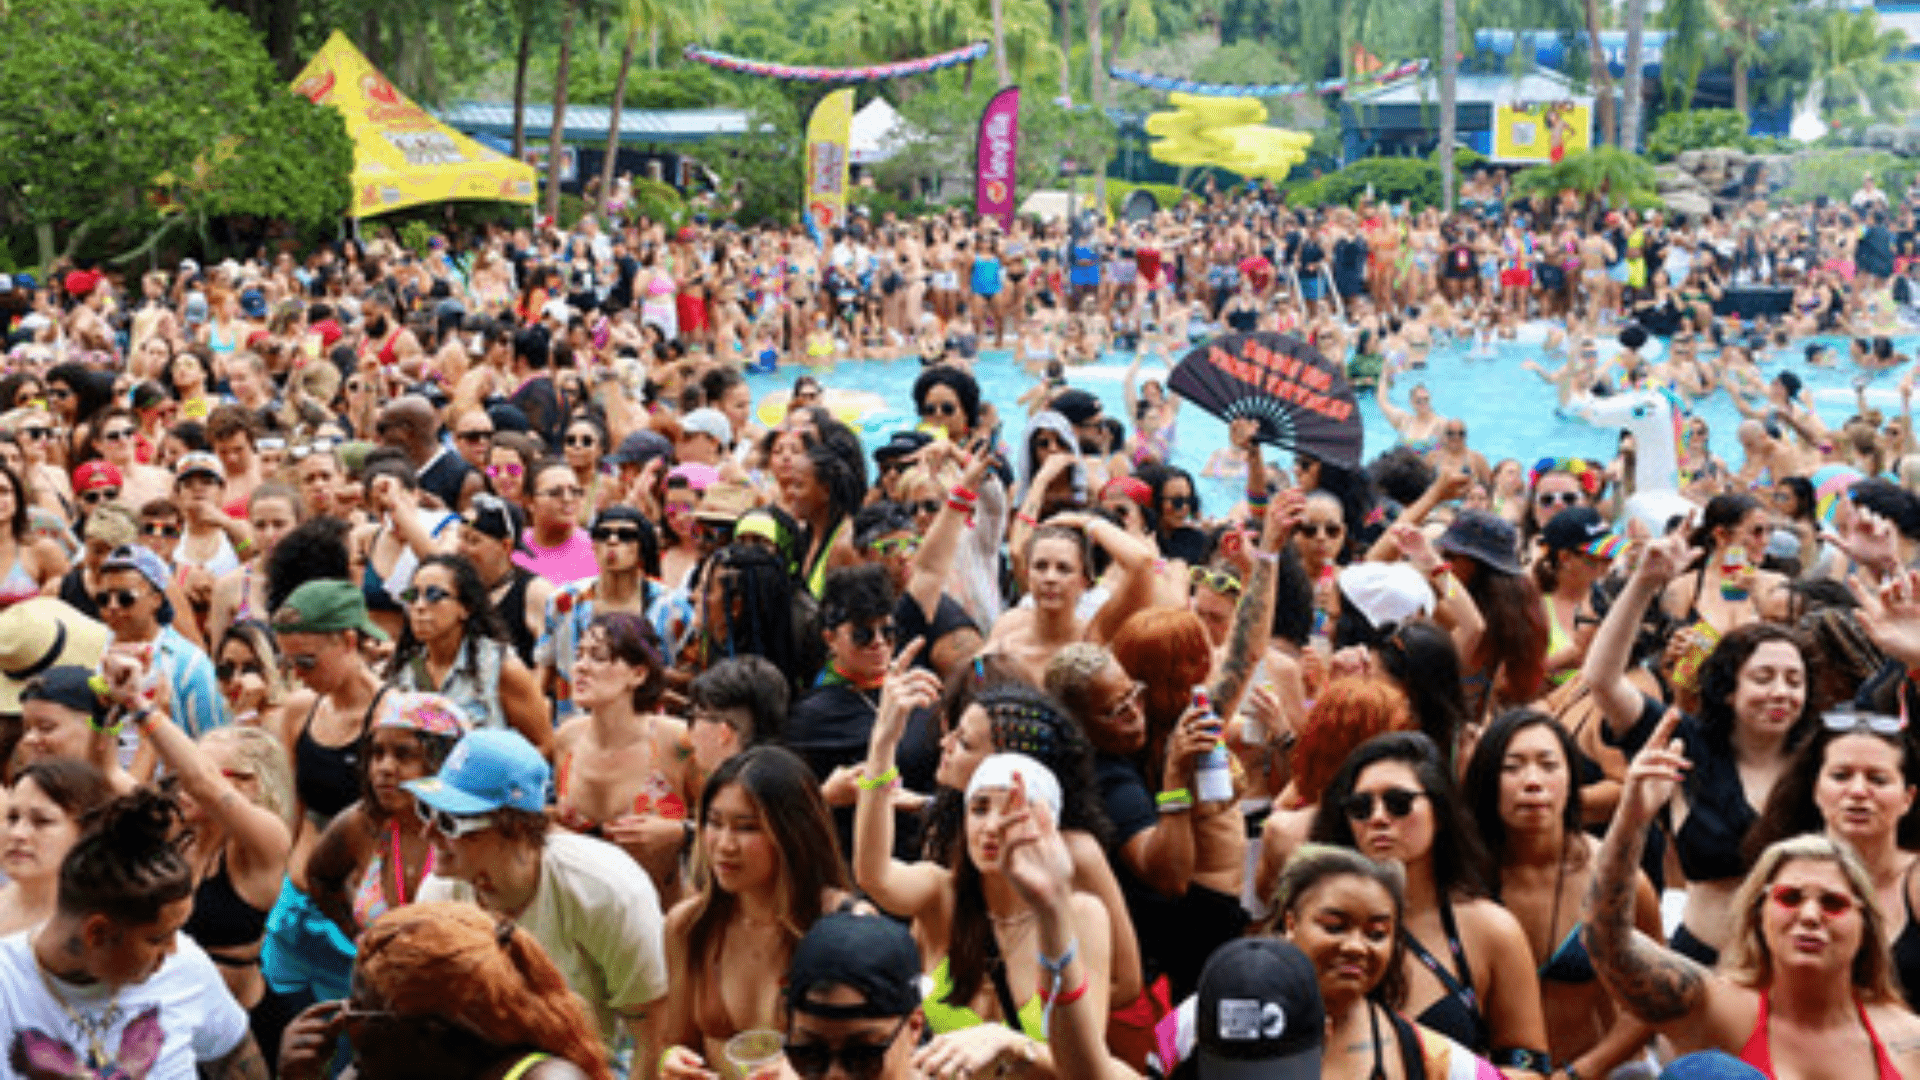 City of Pharr to host Pink Paradise Pool Party